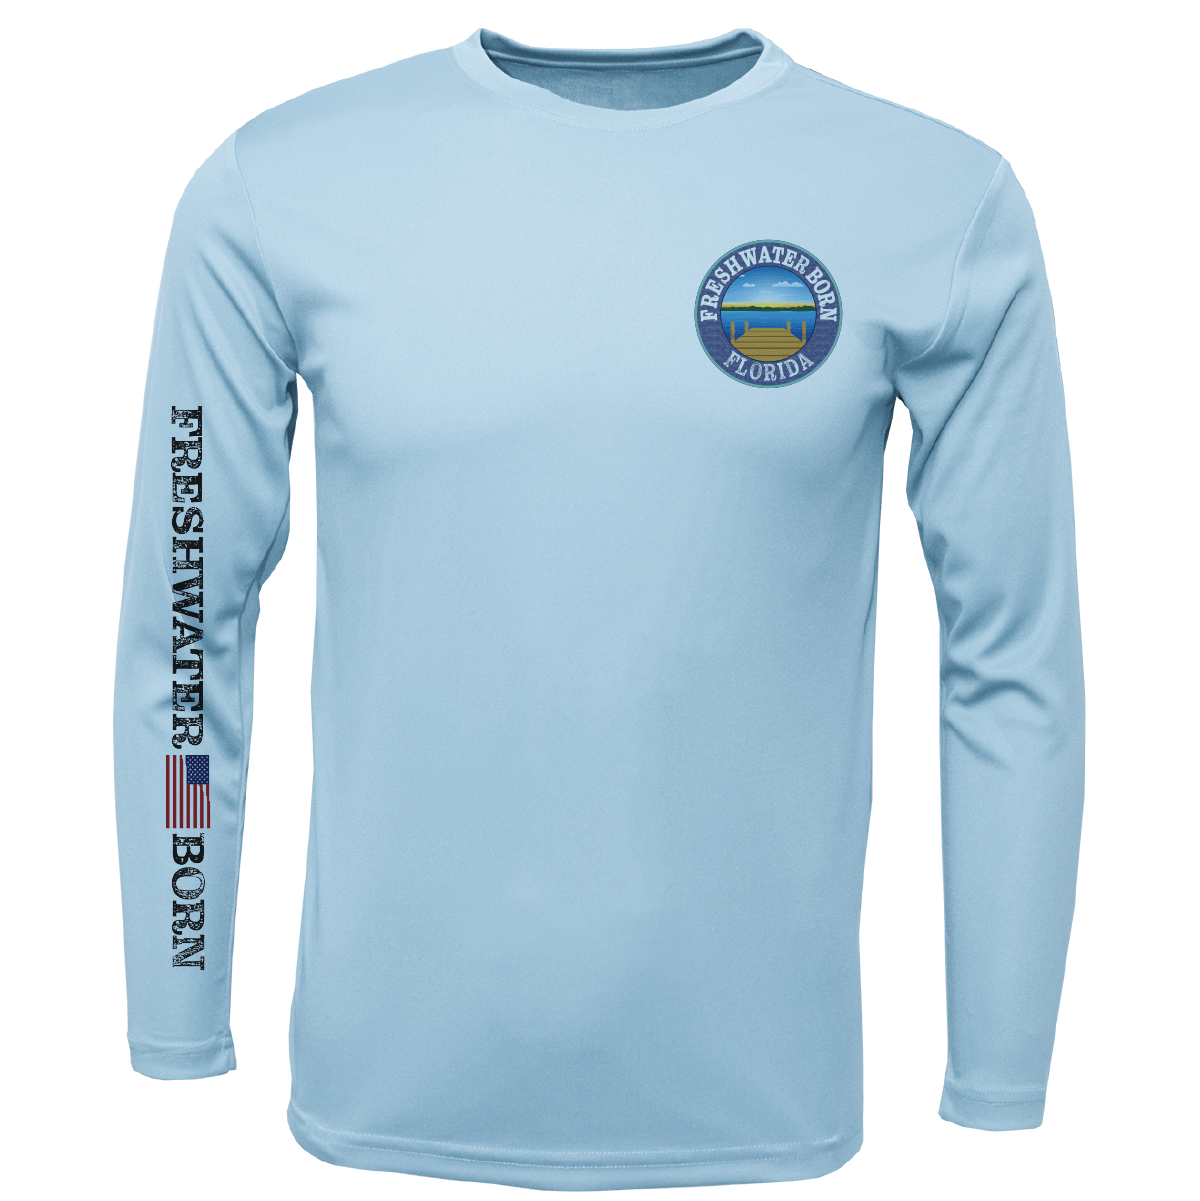 Florida Freshwater Born Surrender The Booty Boy's Long Sleeve UPF 50+ Dry-Fit Shirt in Seafoam | Size Youth Medium